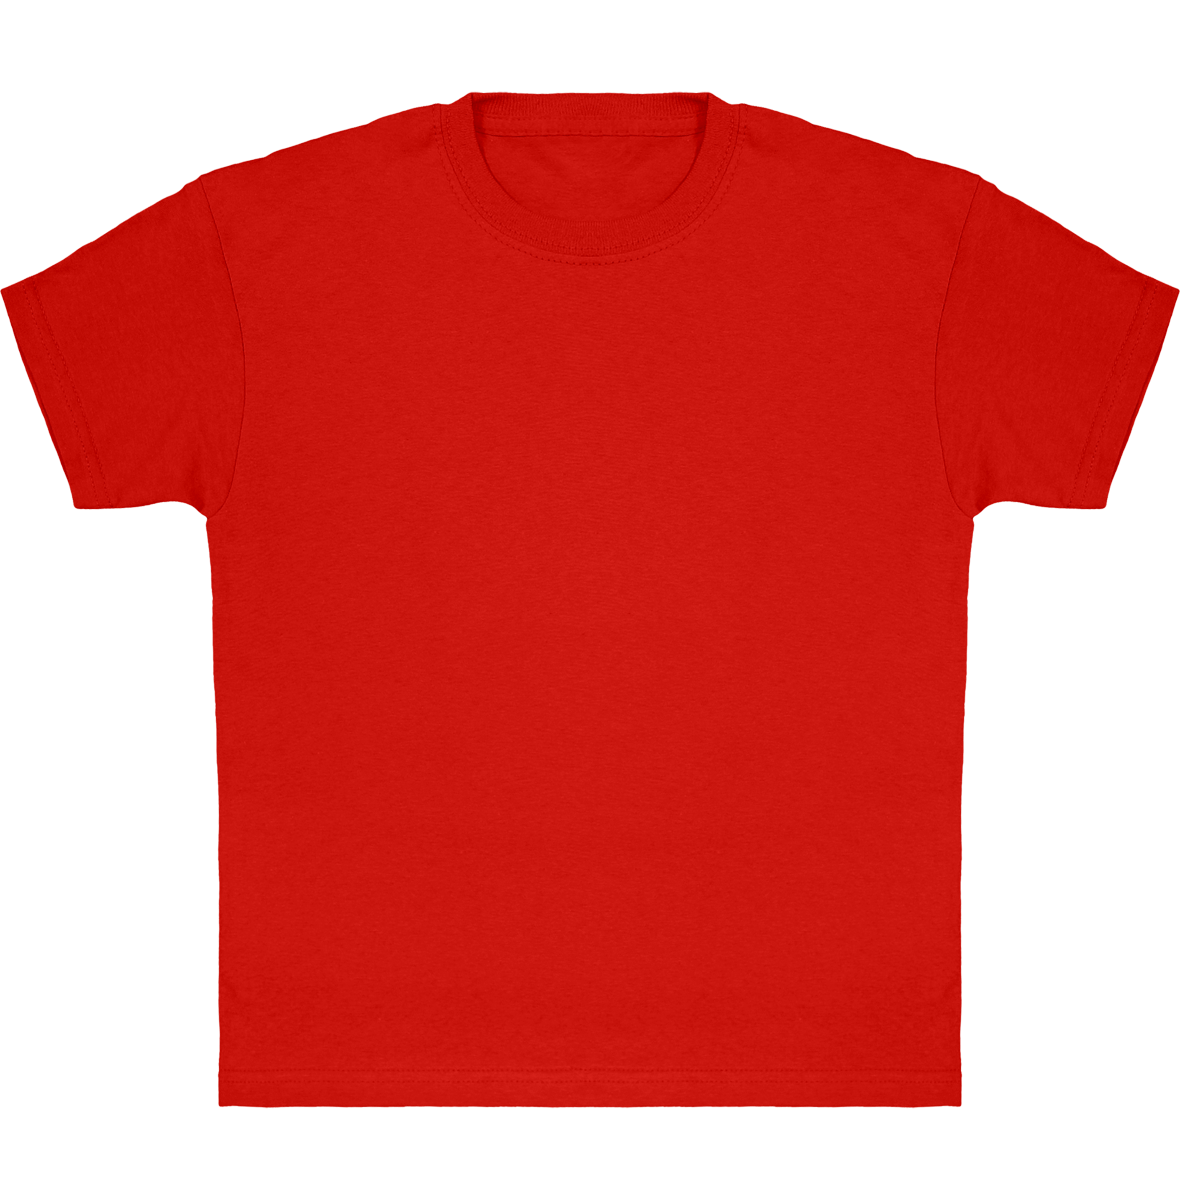 Classic Cotton T-Shirt For Children To Customize Red